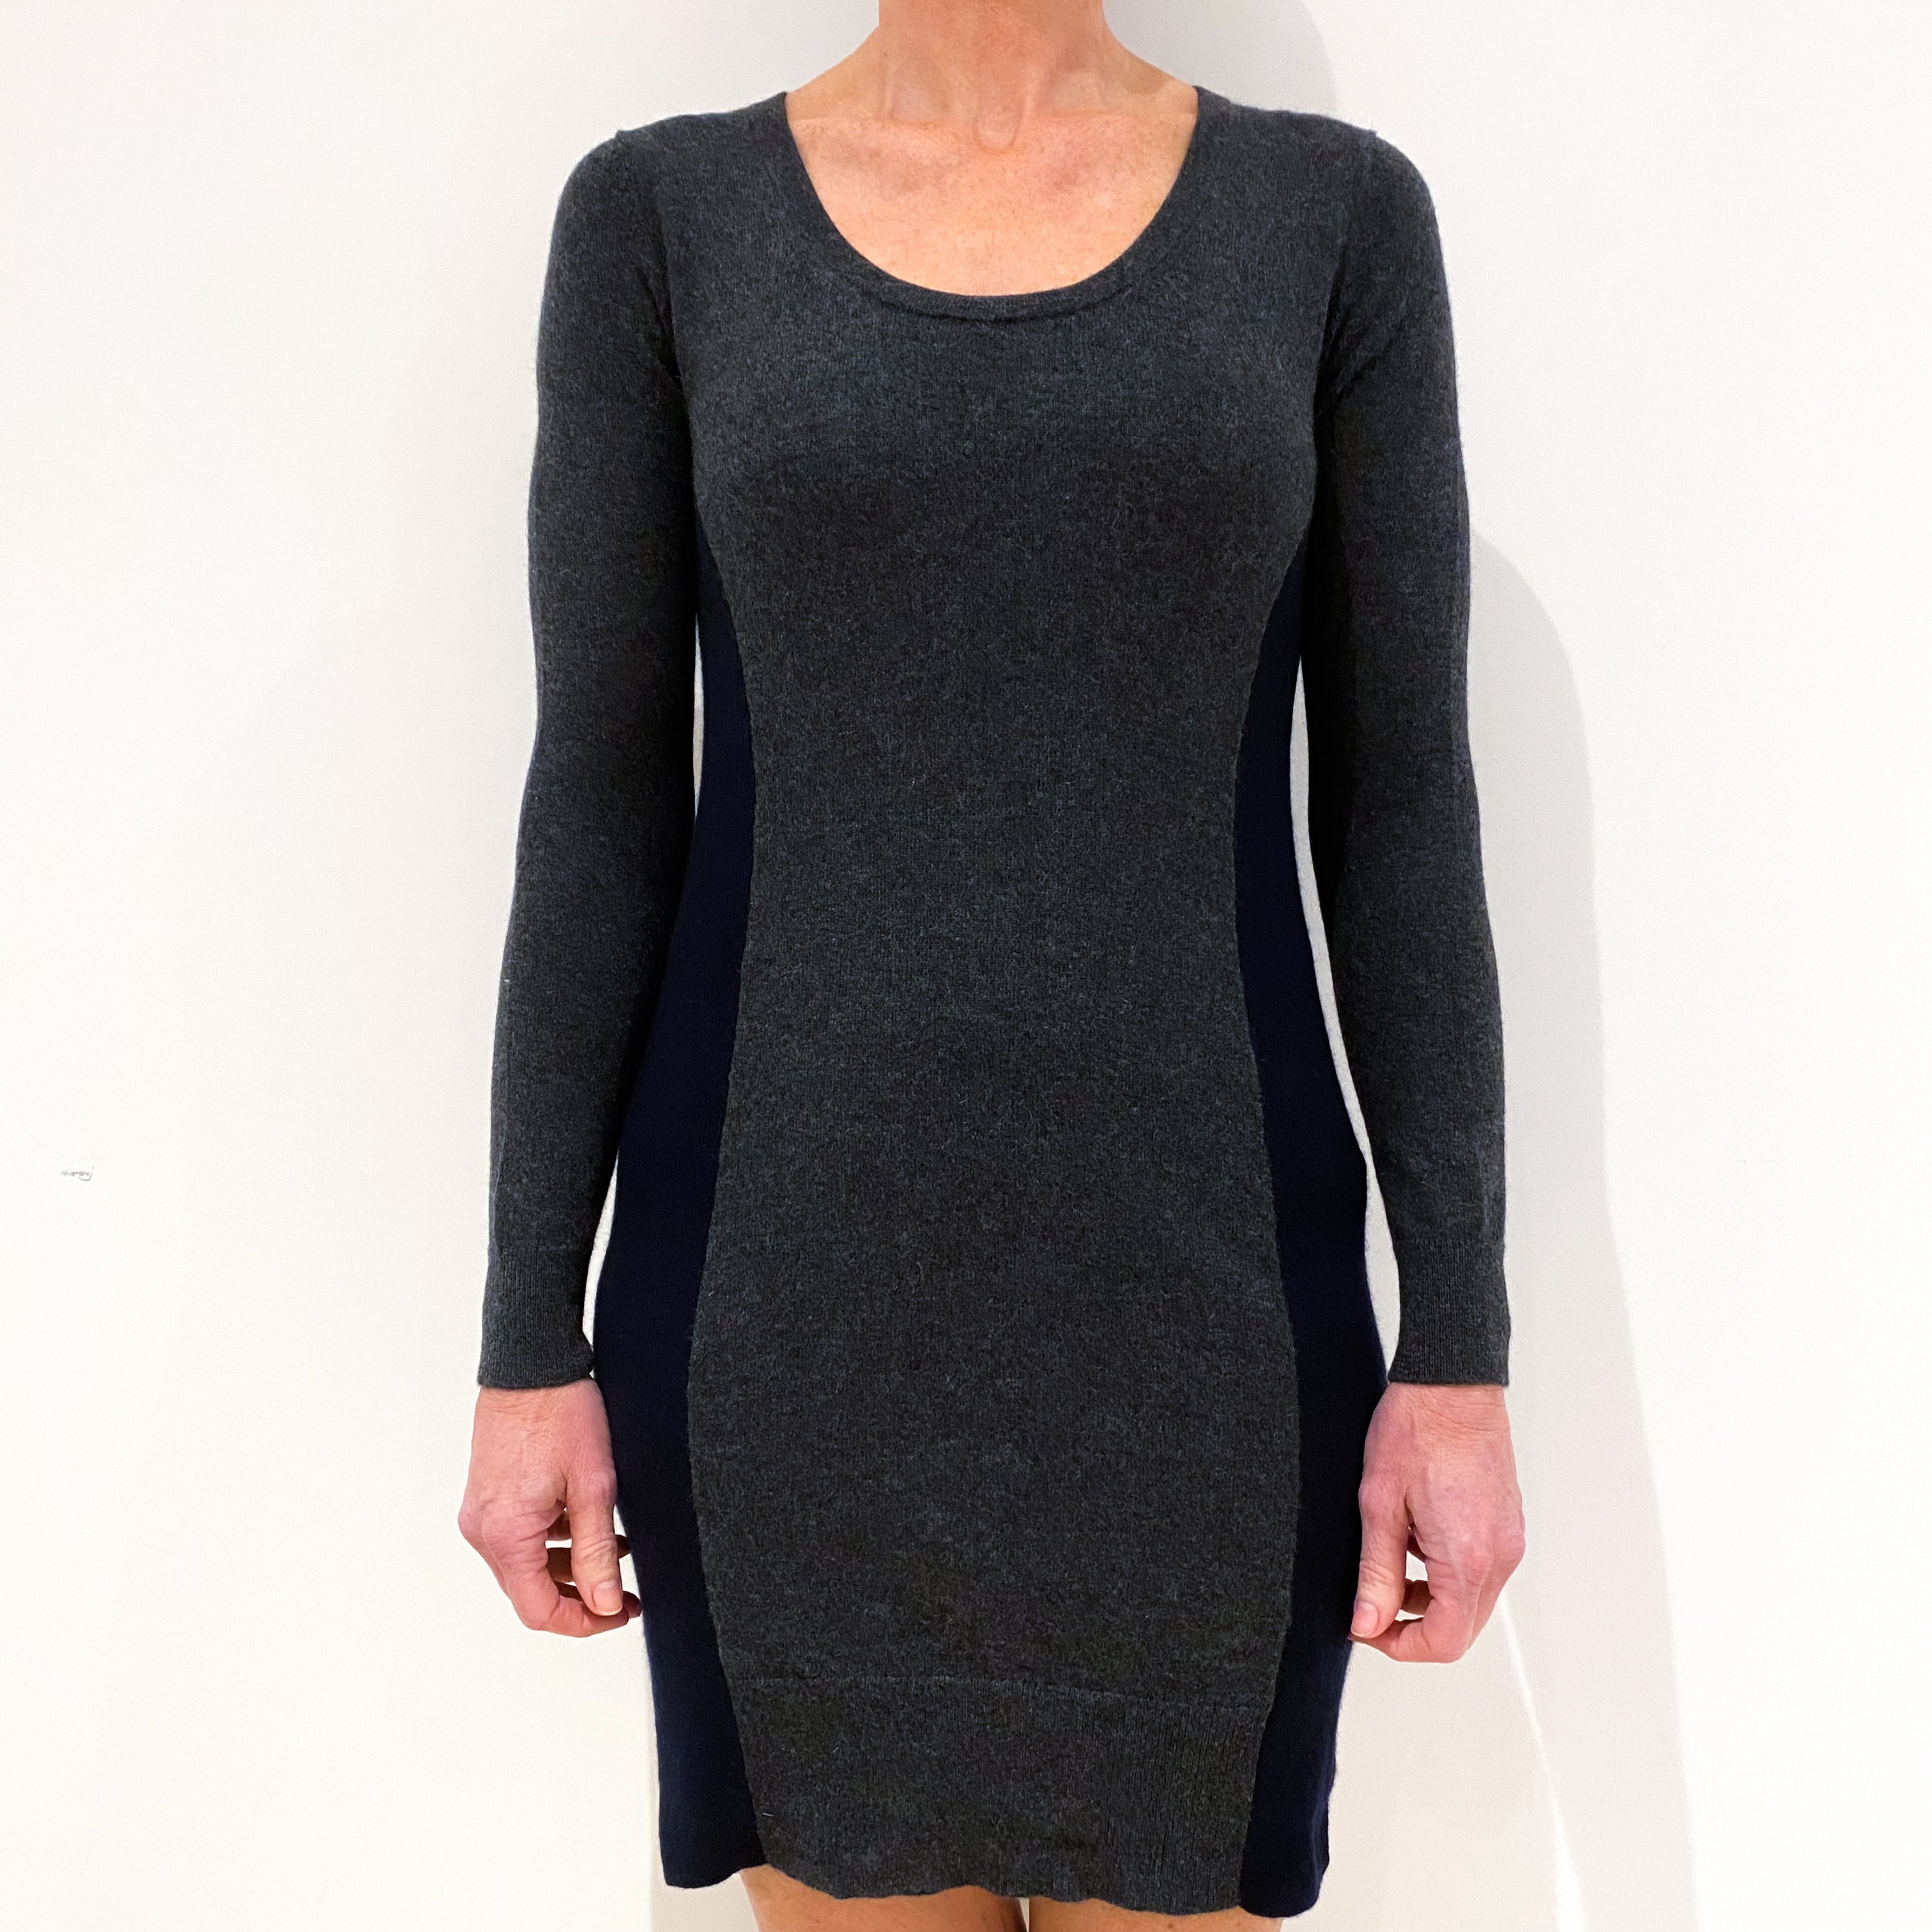 Charcoal Grey Cashmere Scoop Neck Dress Small